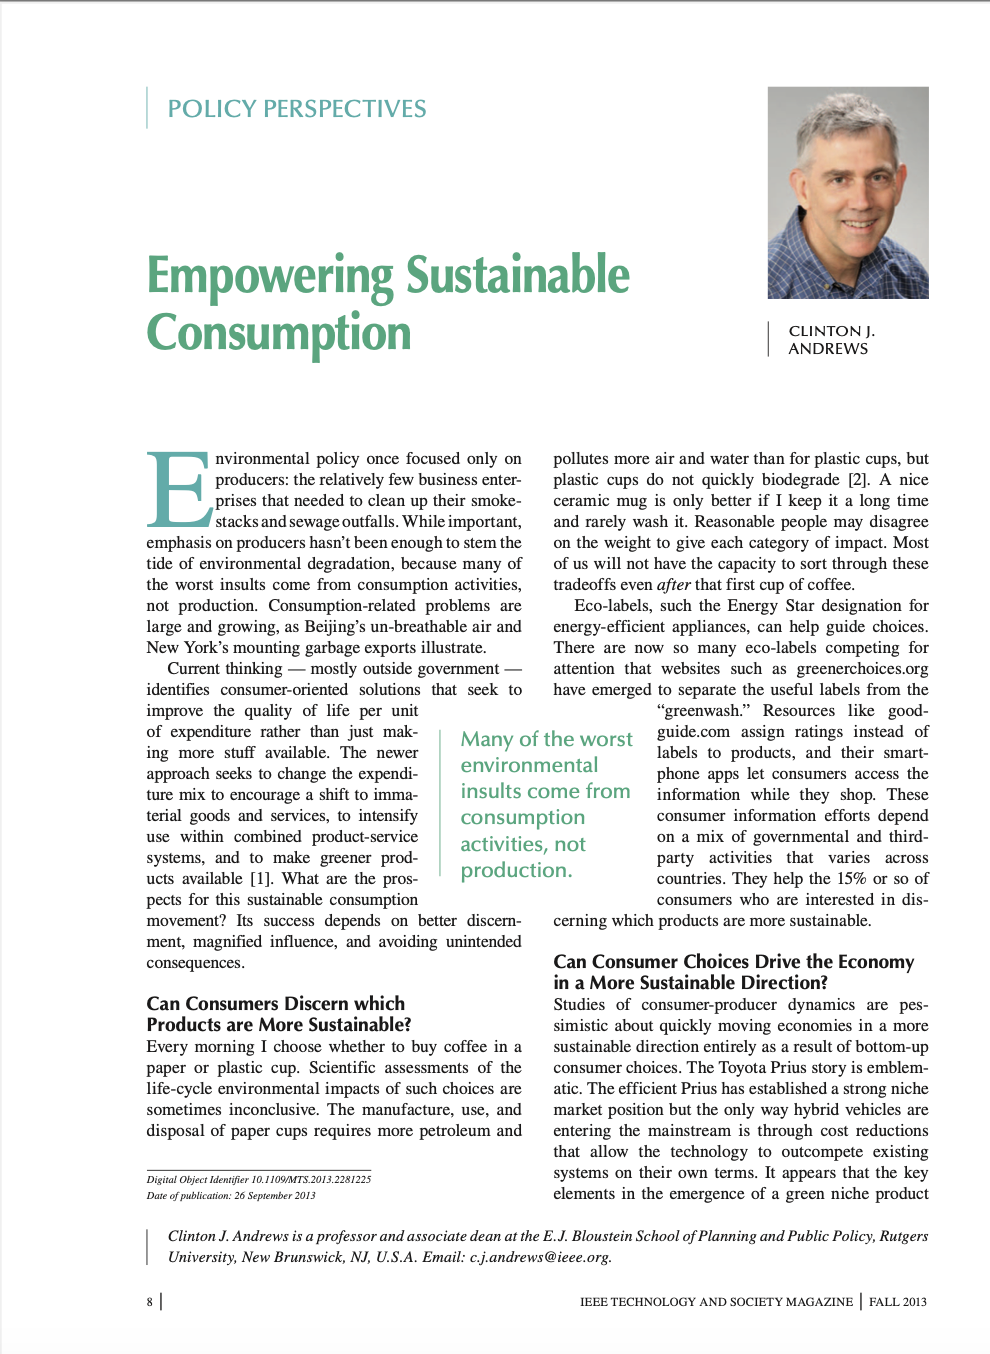 Empowering Sustainable Consumption